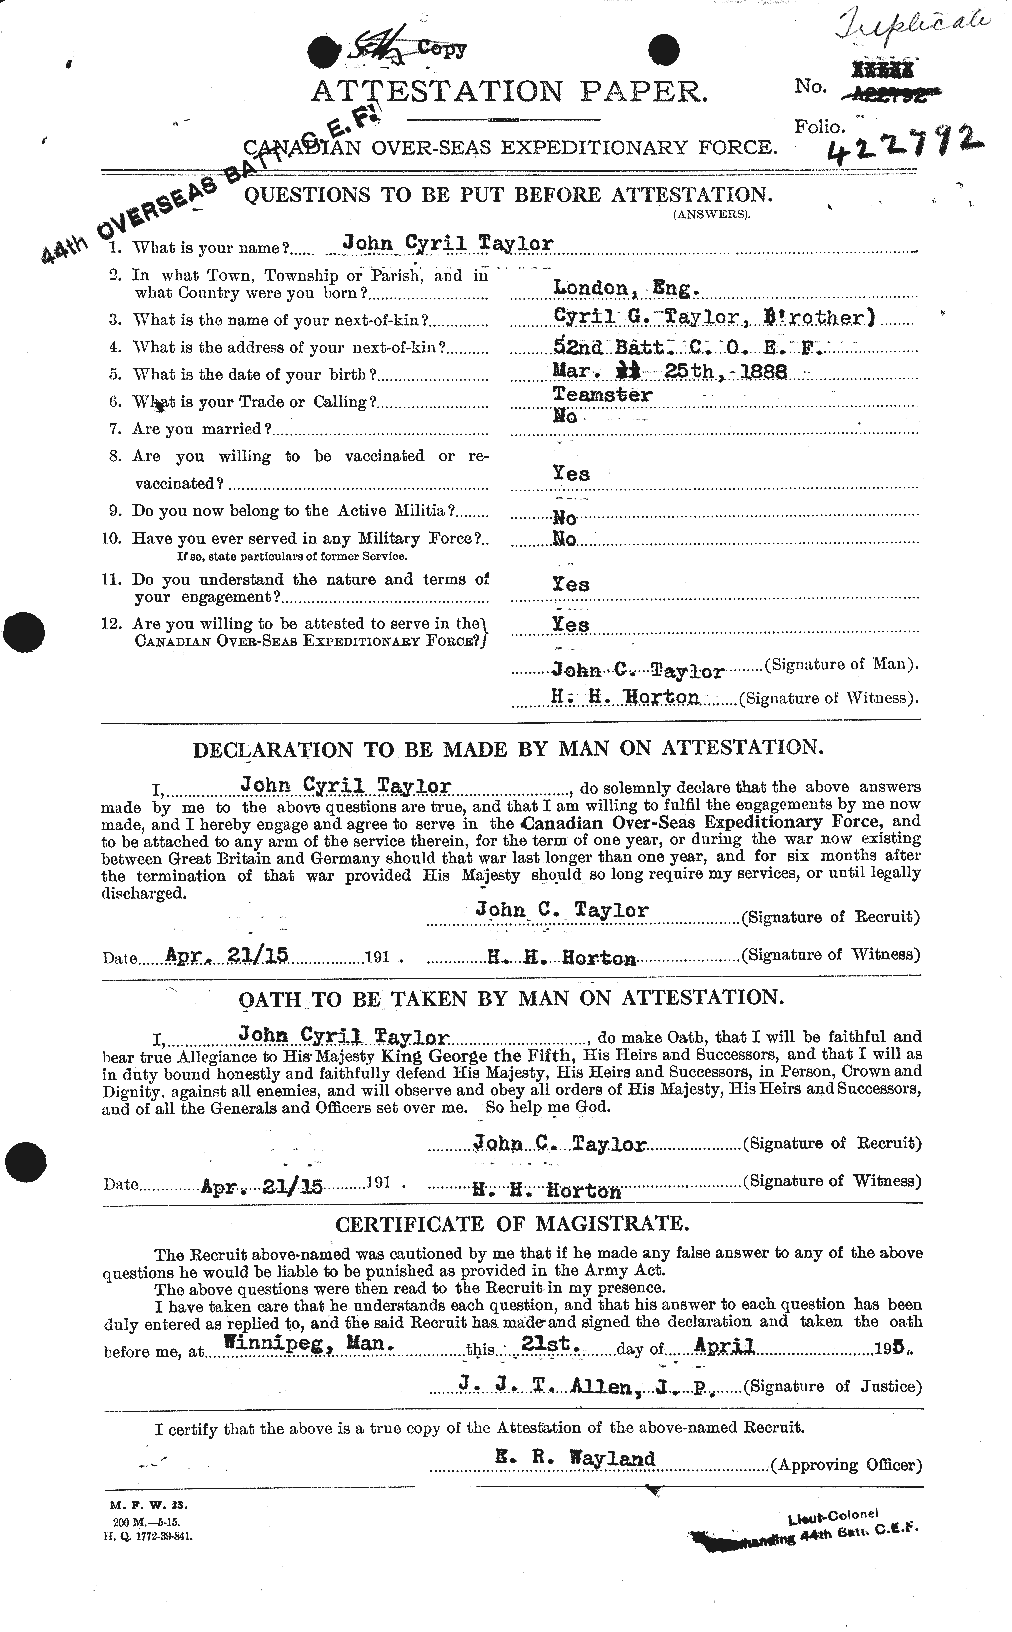 Personnel Records of the First World War - CEF 627064a